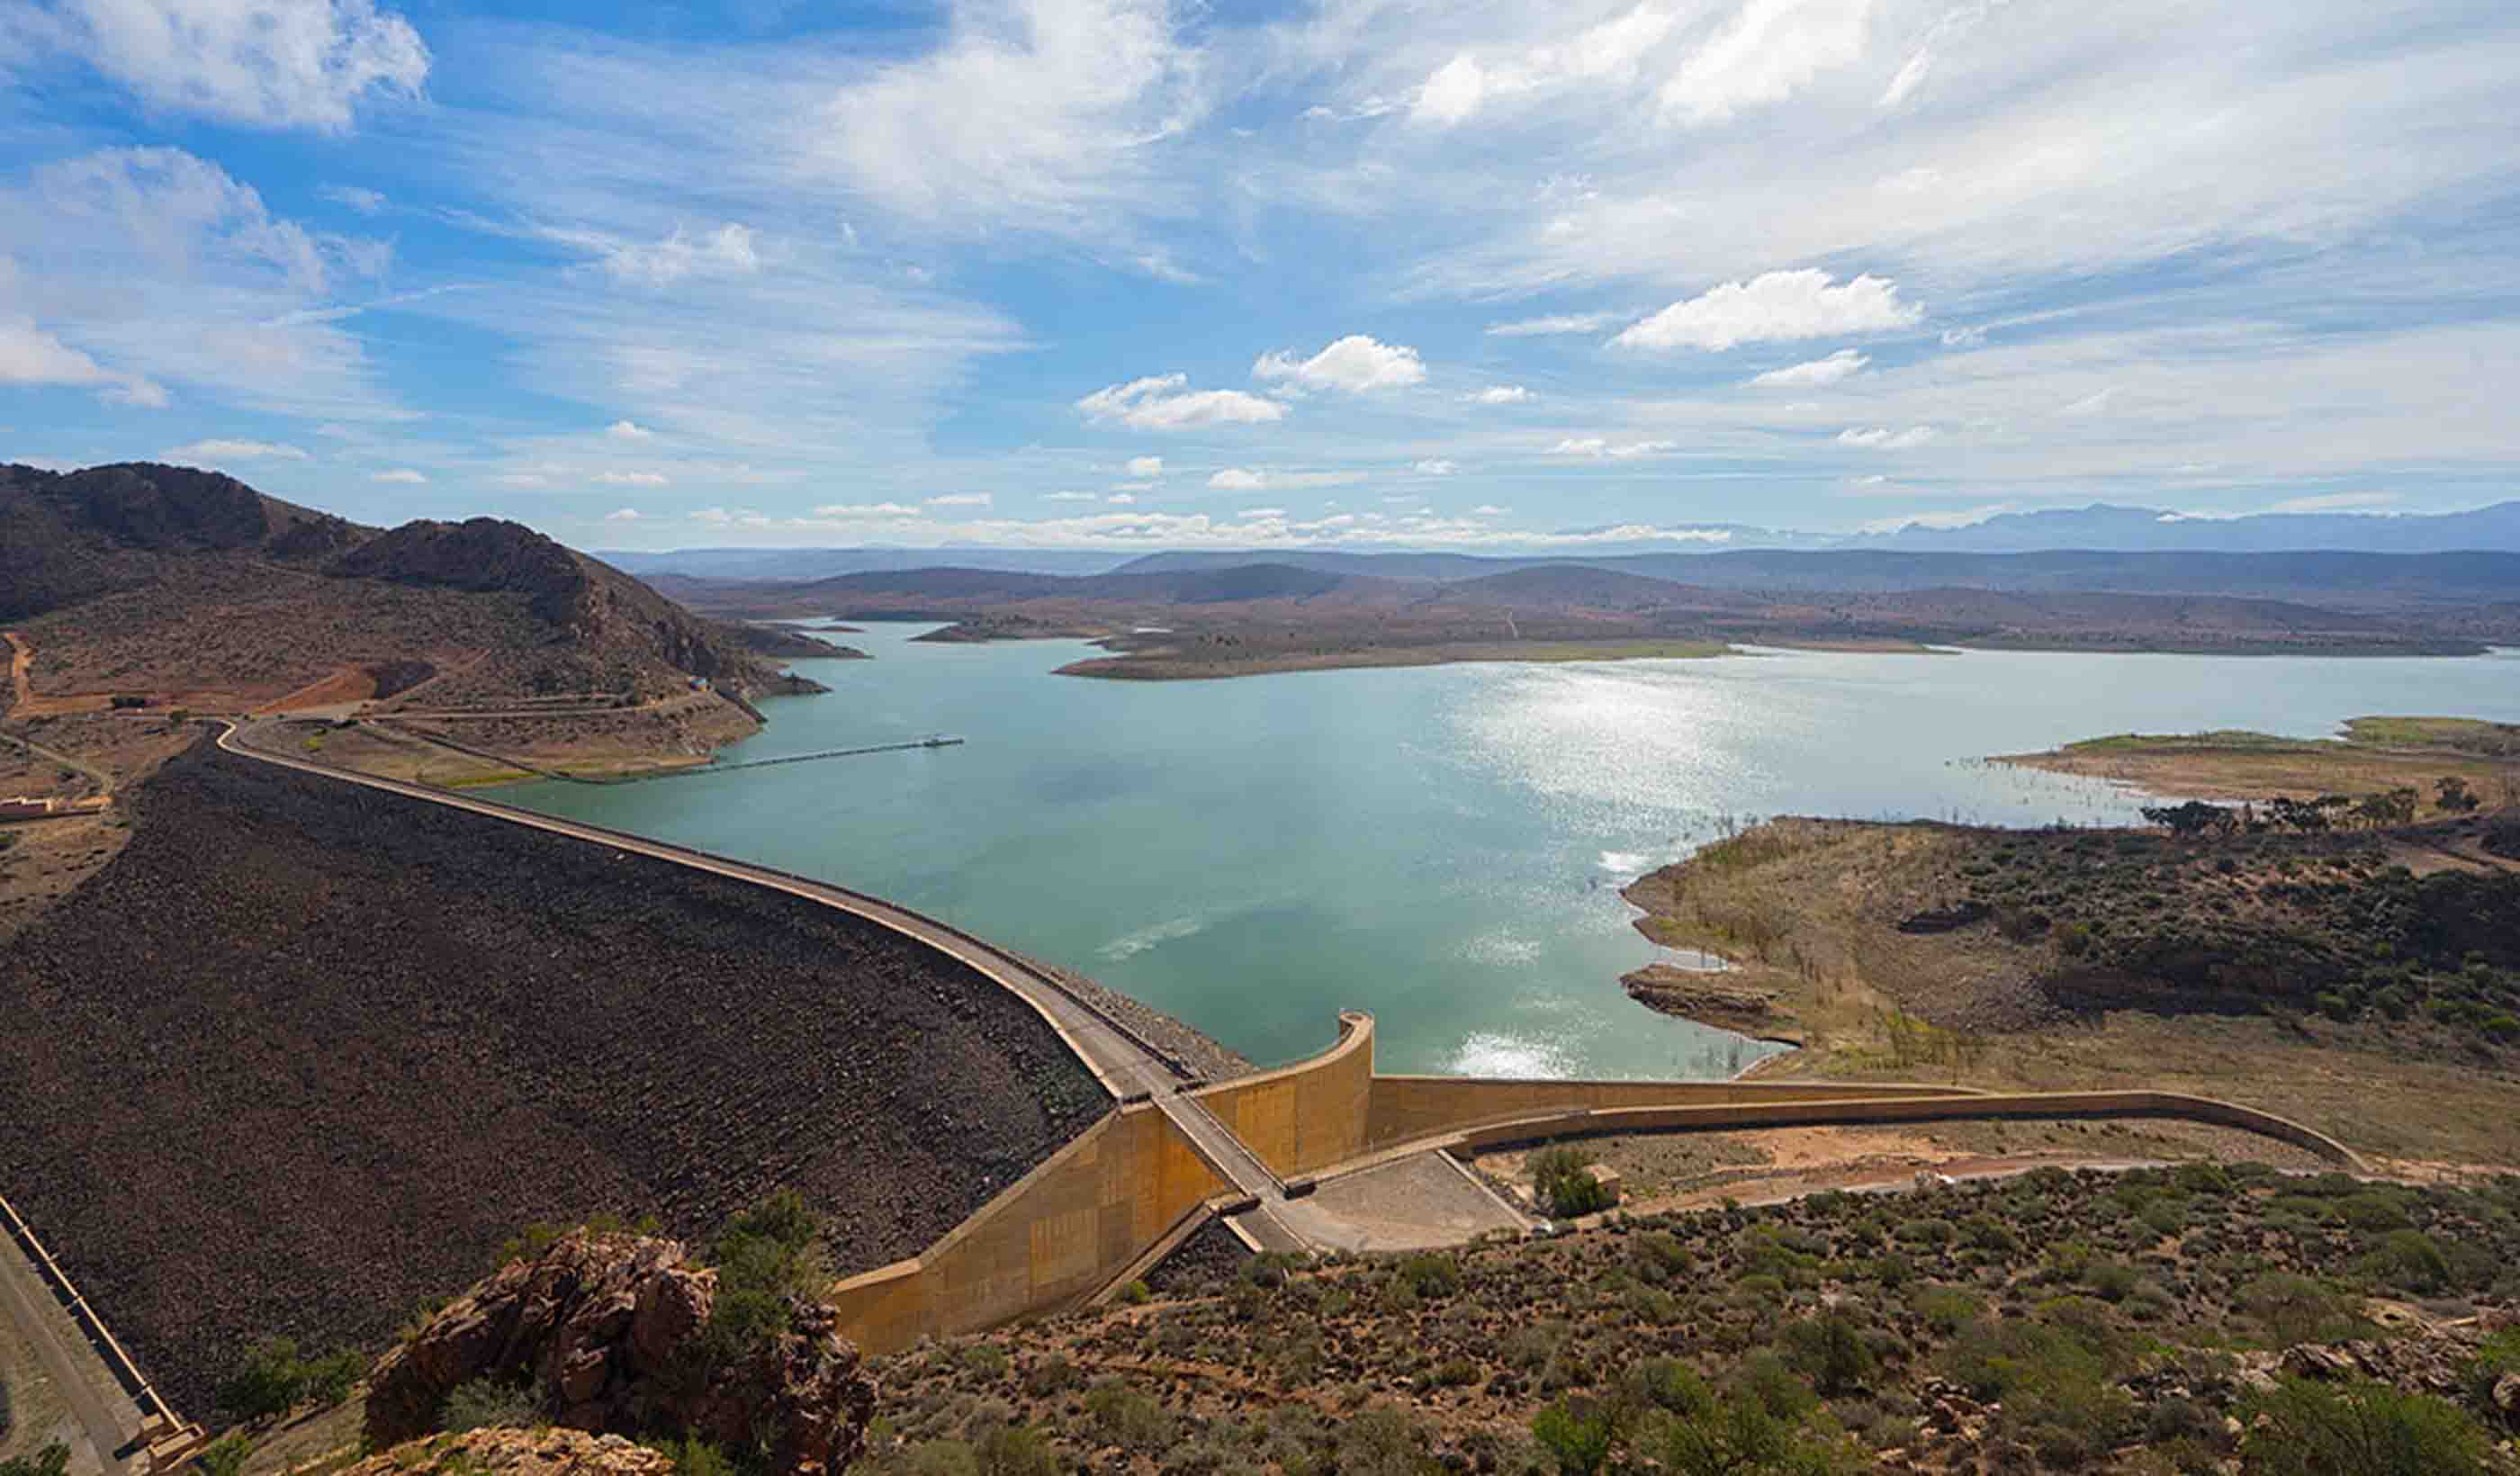 3 reasons why dam owners should prioritize adequate instrumentation and data